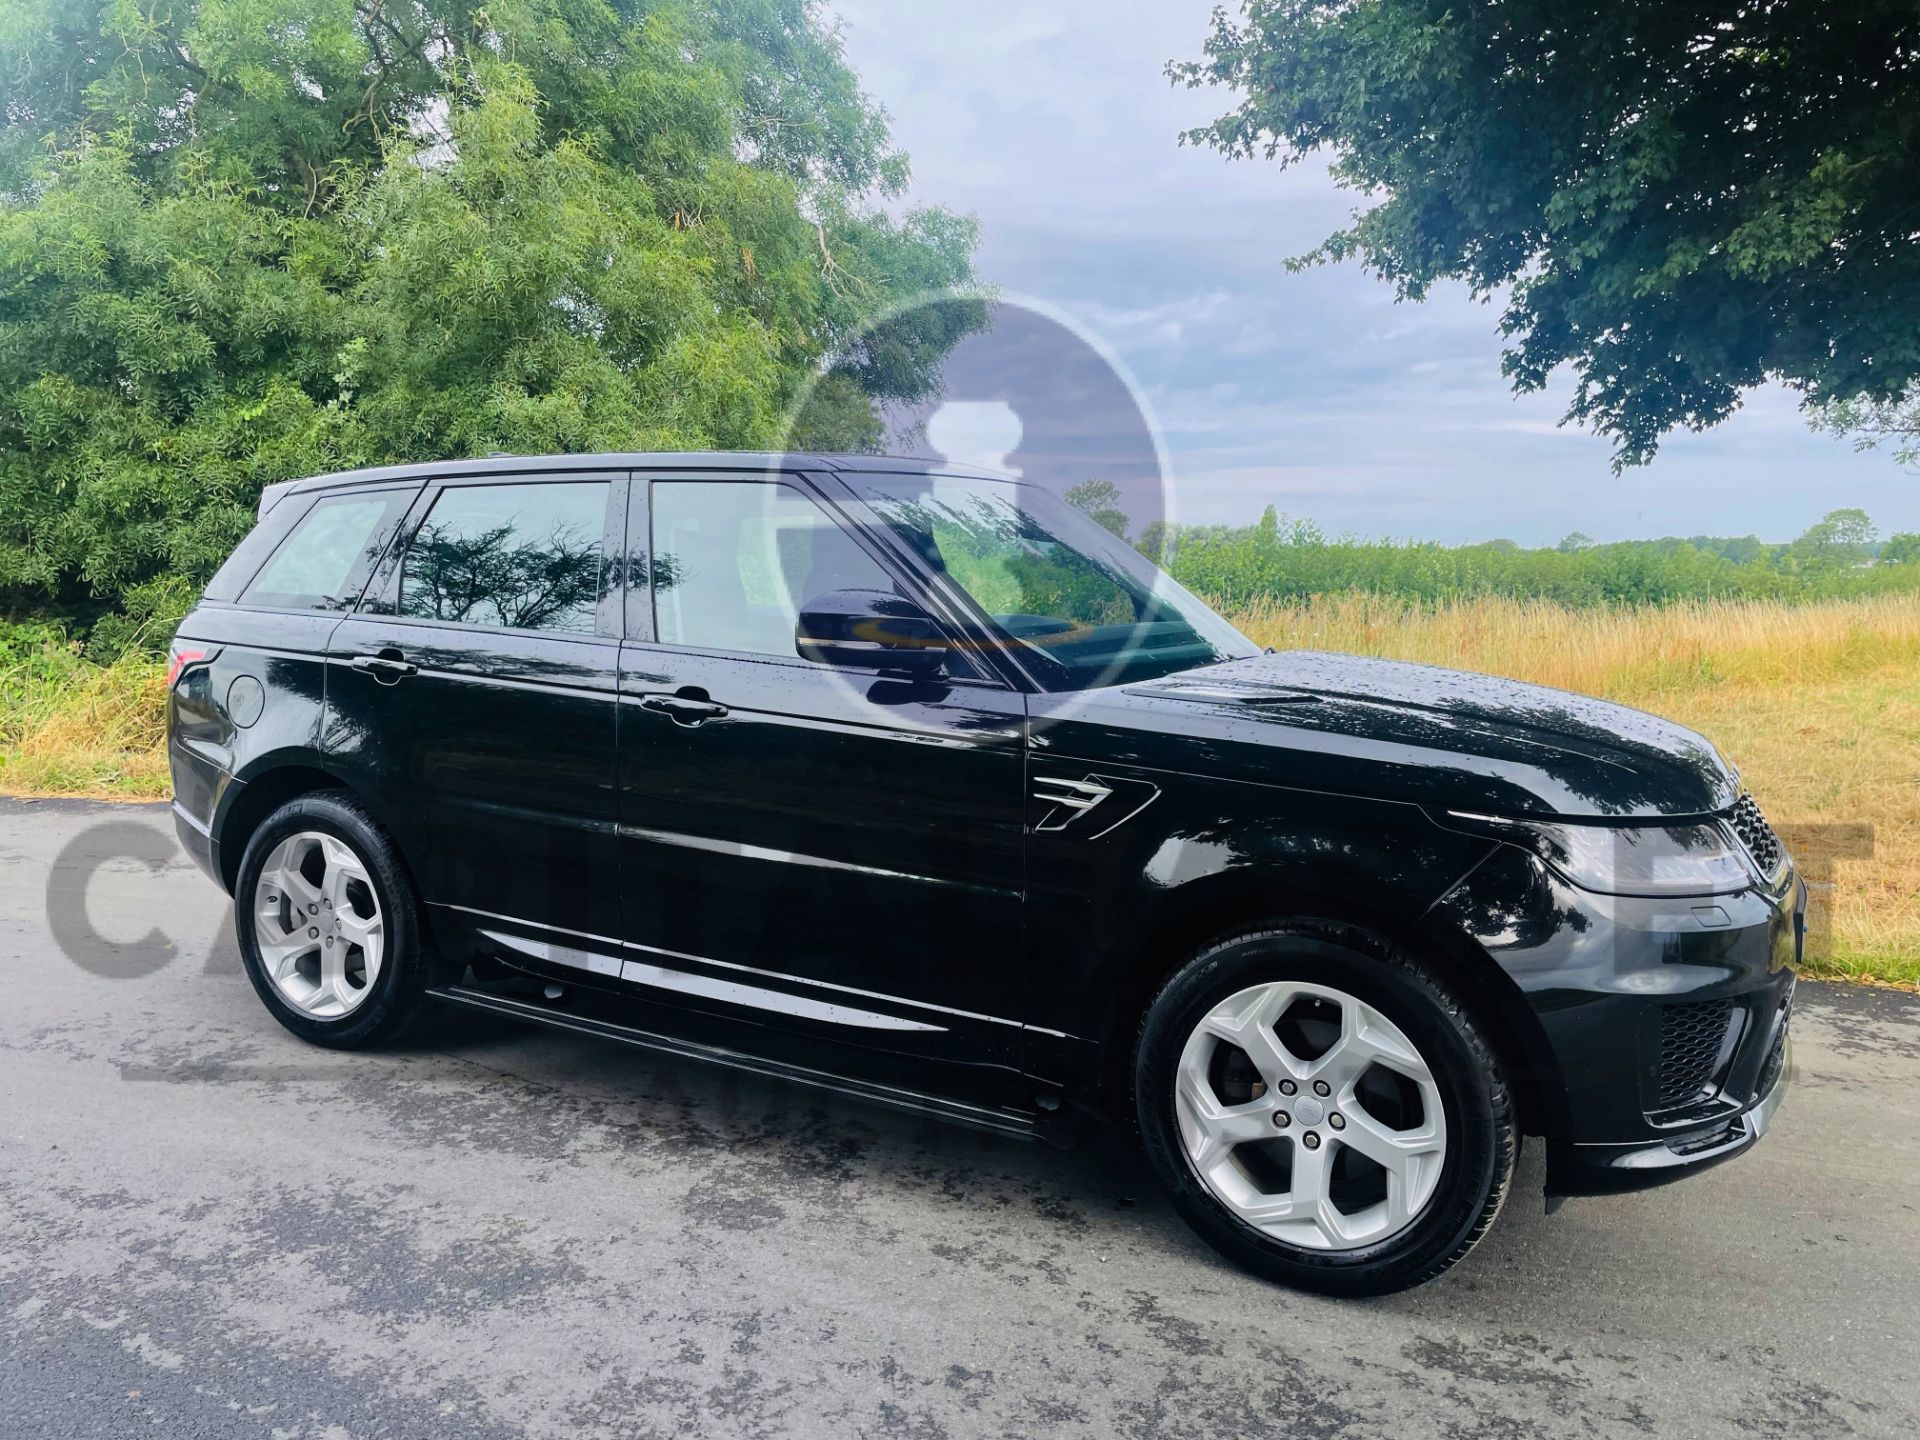 RANGE ROVER SPORT *HSE EDITION* SUV (2018 - NEW MODEL) EURO 6 DIESEL - 8 SPEED AUTOMATIC *HUGE SPEC*